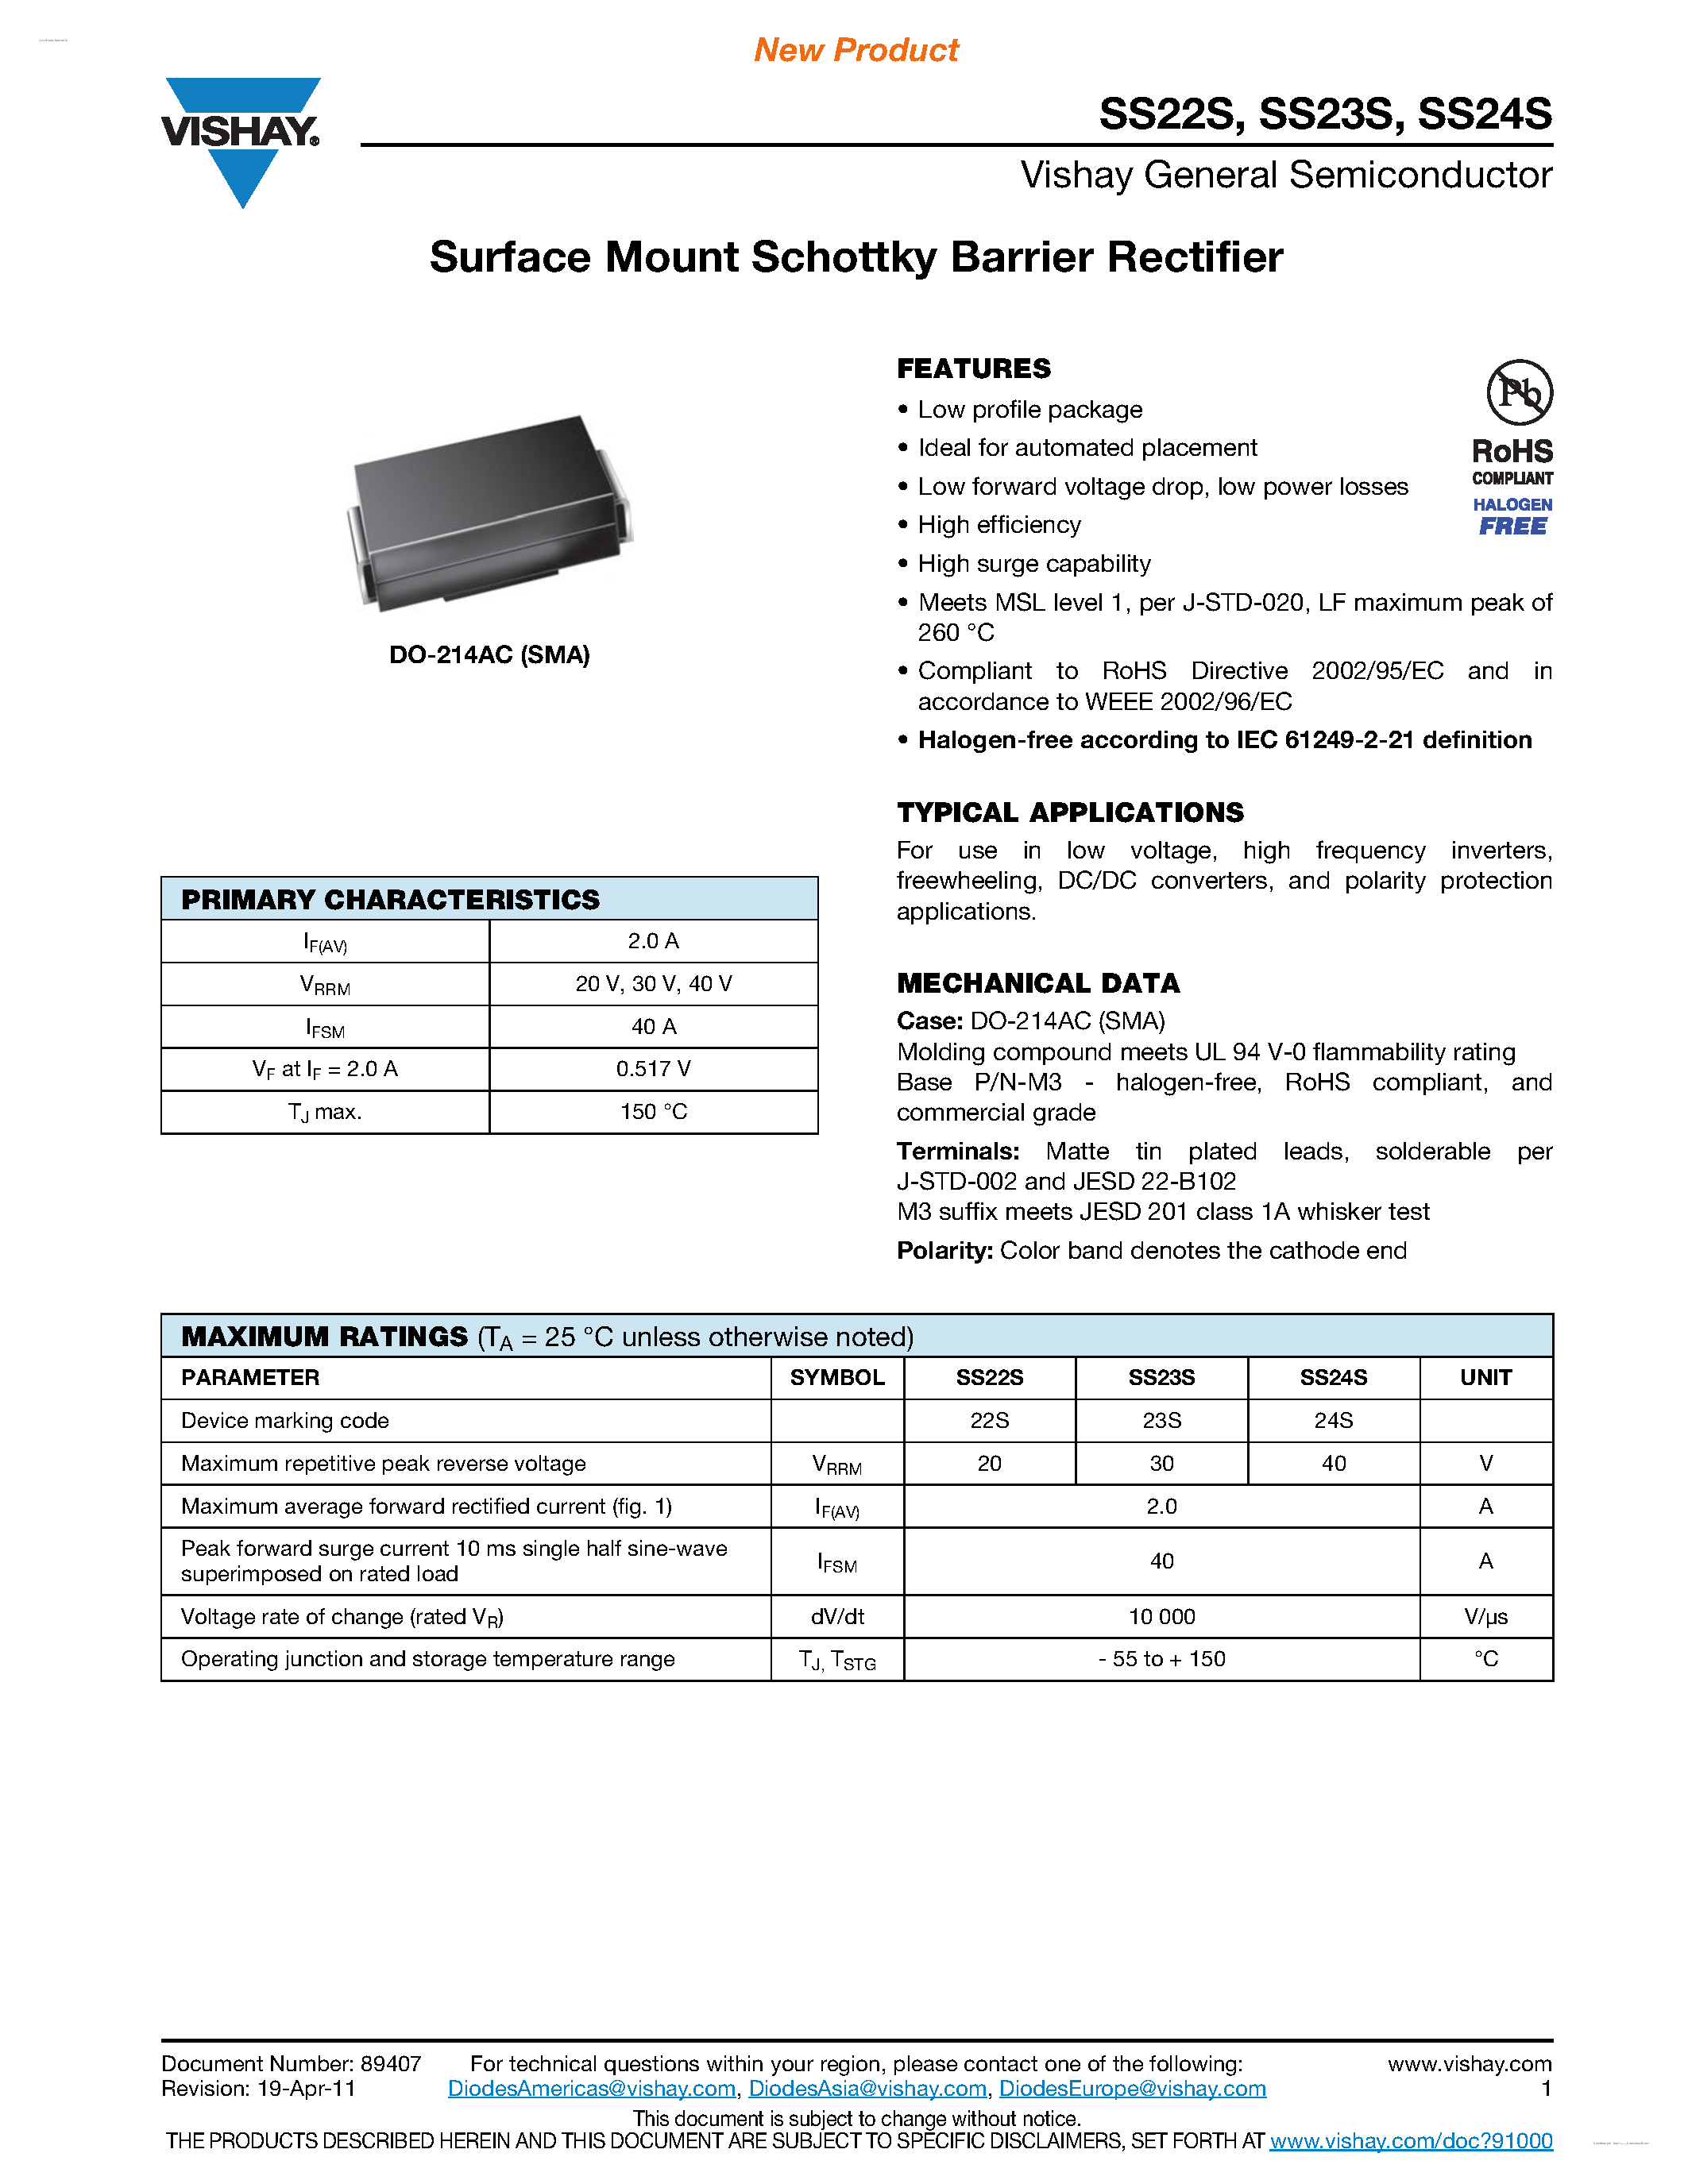 Даташит SS22S - (SS22S - SS24S) Surface Mount Schottky Barrier Rectifier страница 1